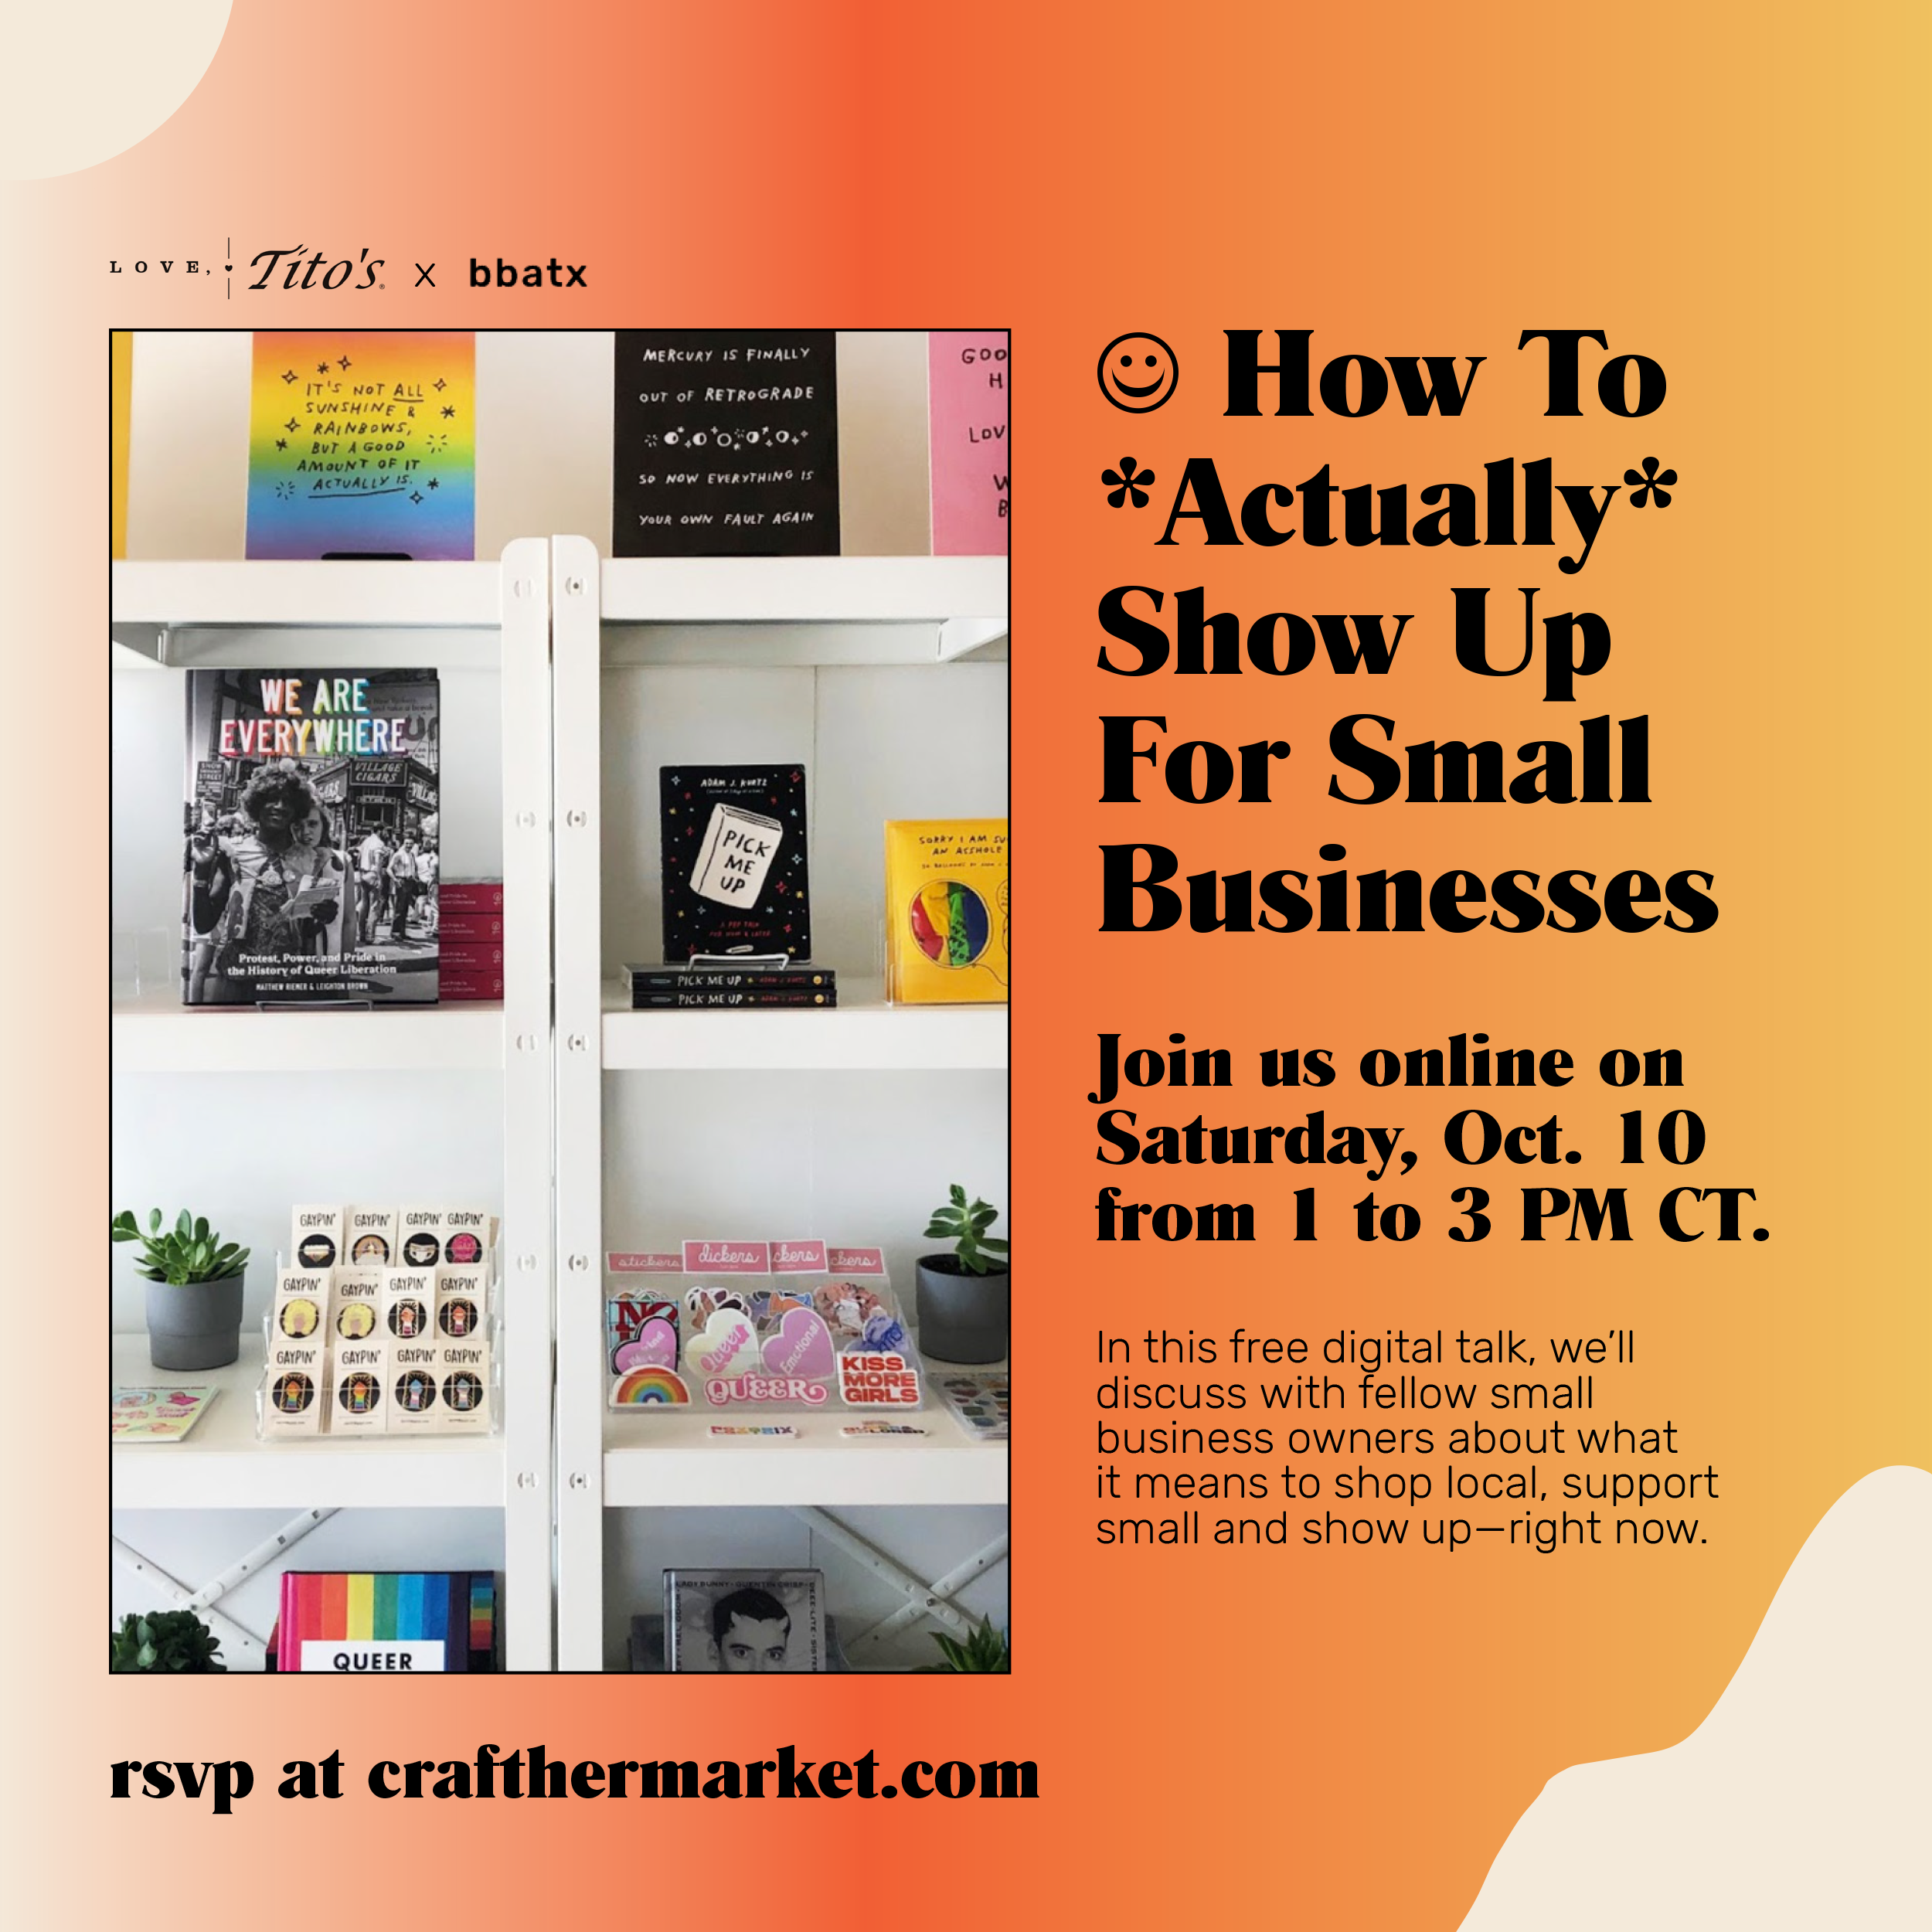 How To *Actually* Show Up For Small Businesses